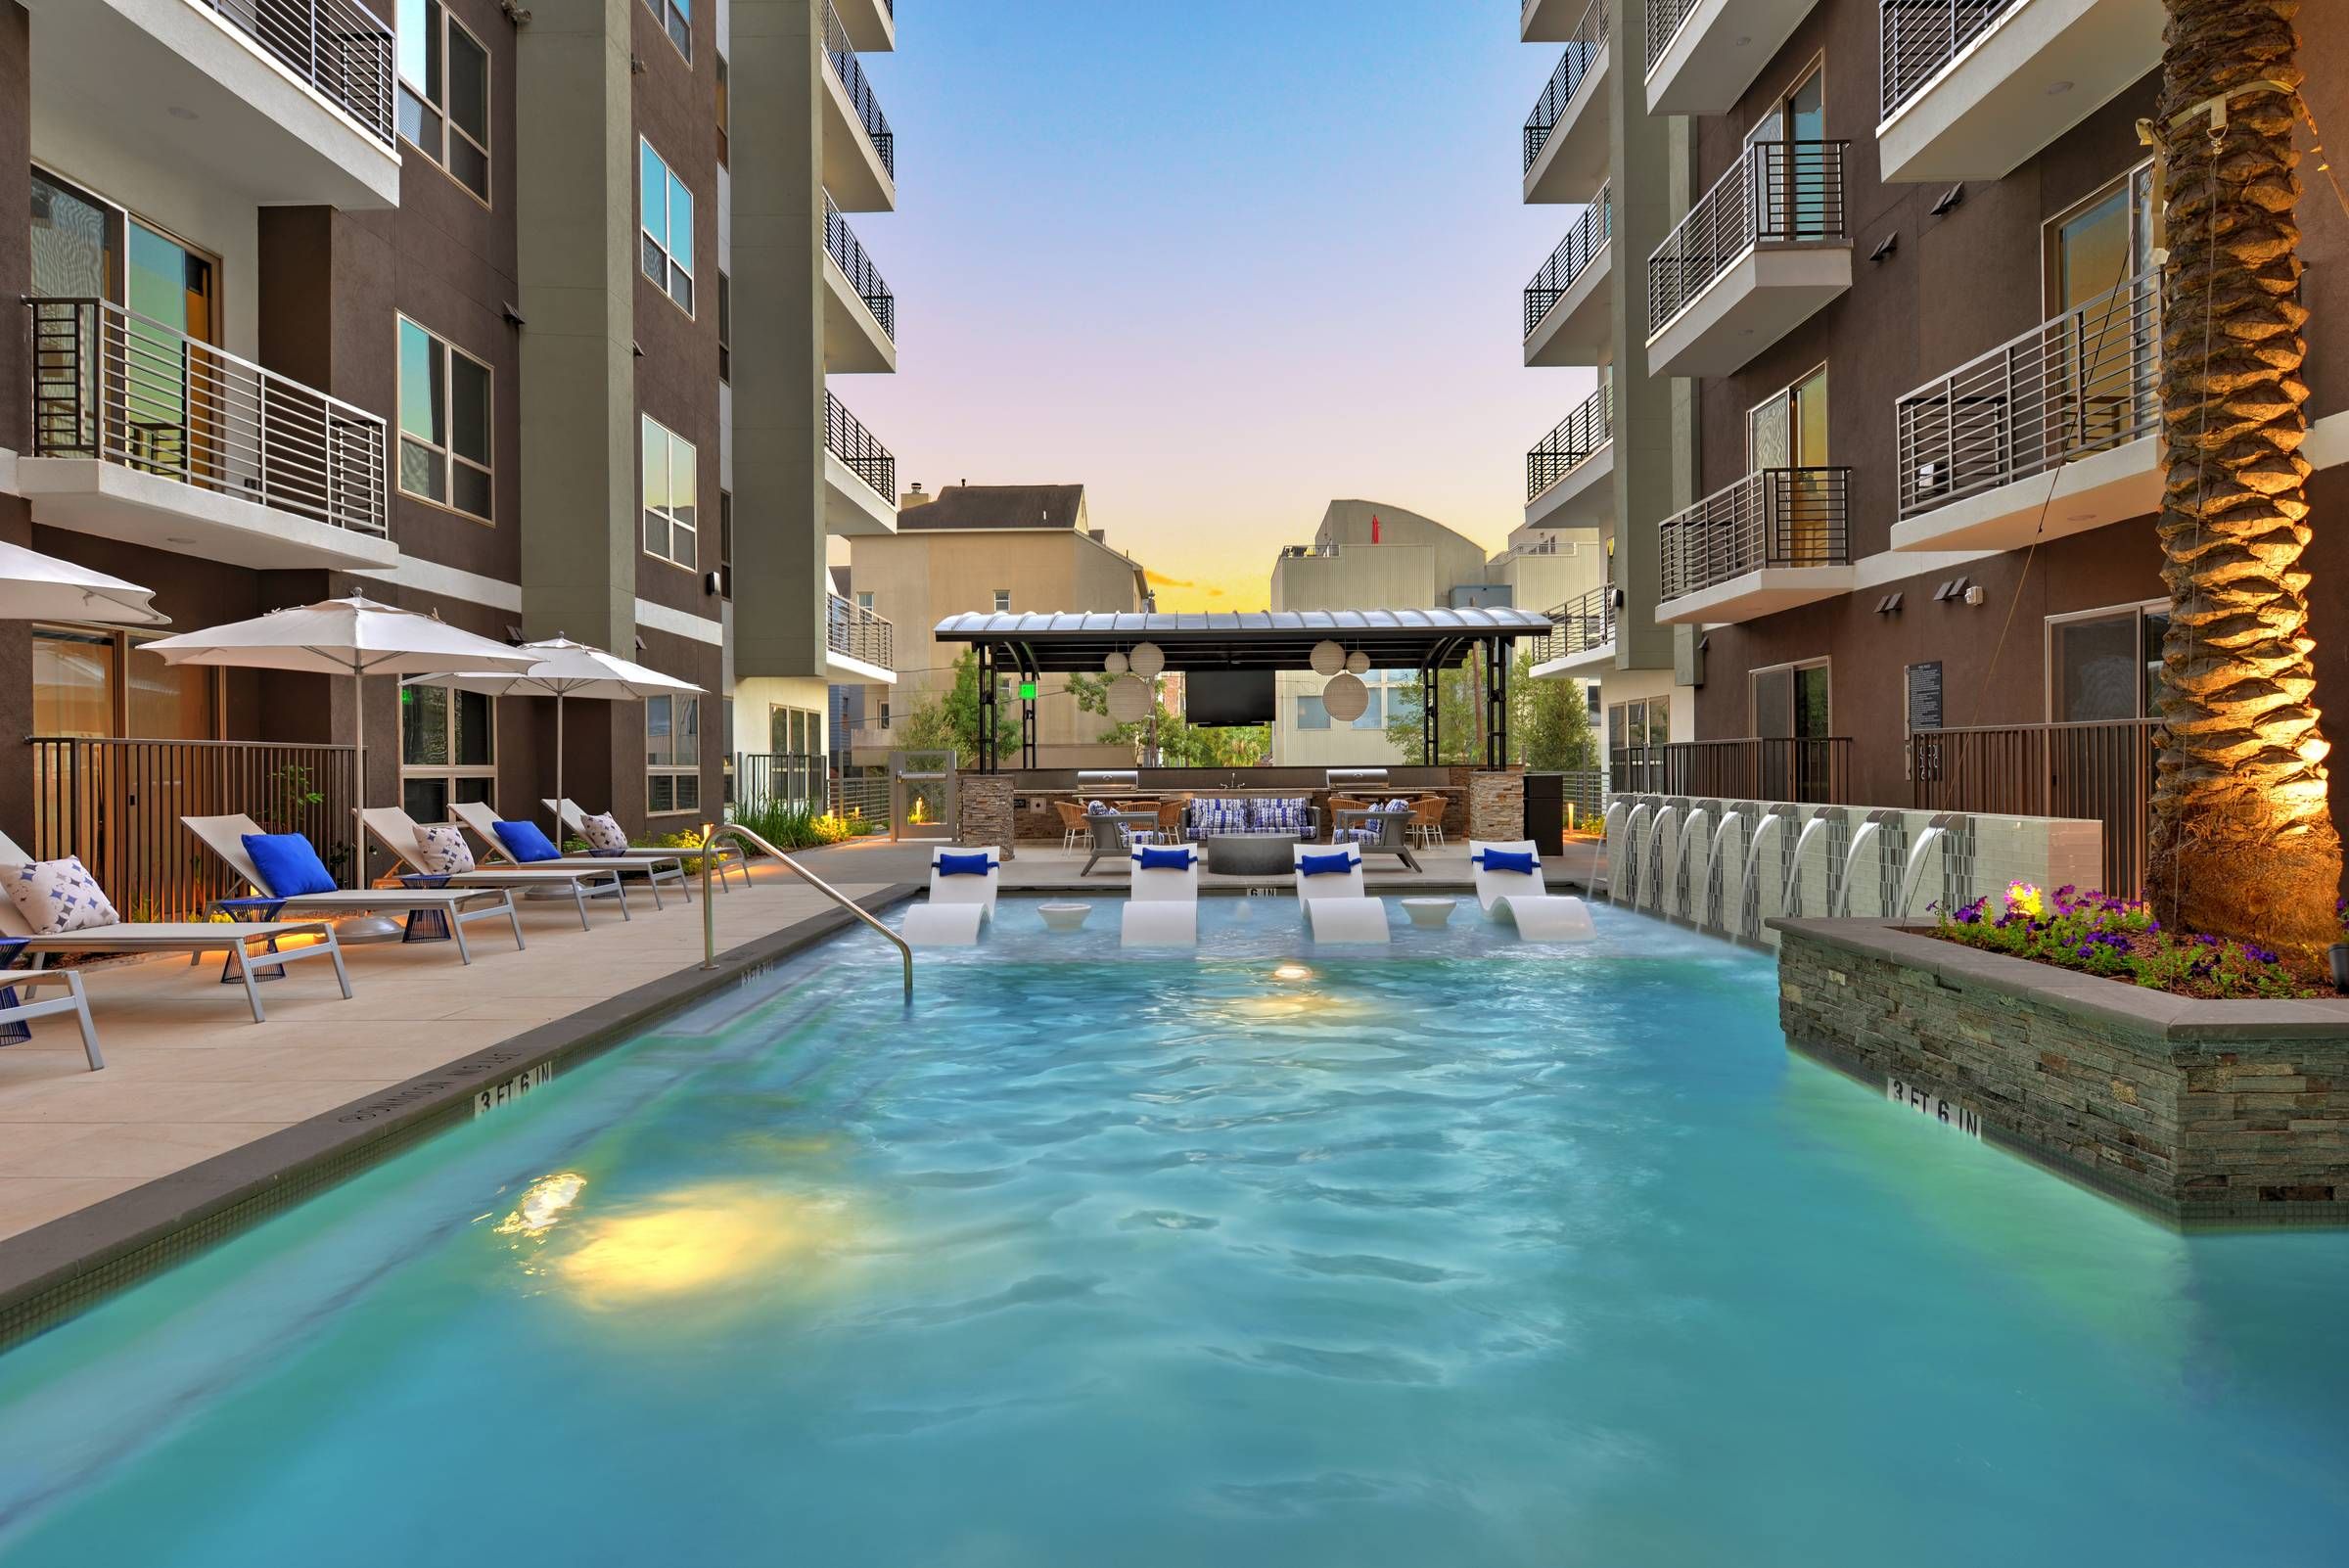 Alta West Gray's pool area with loungers, blue umbrellas, and an outdoor kitchen, surrounded by multi-story residential buildings at sunset.